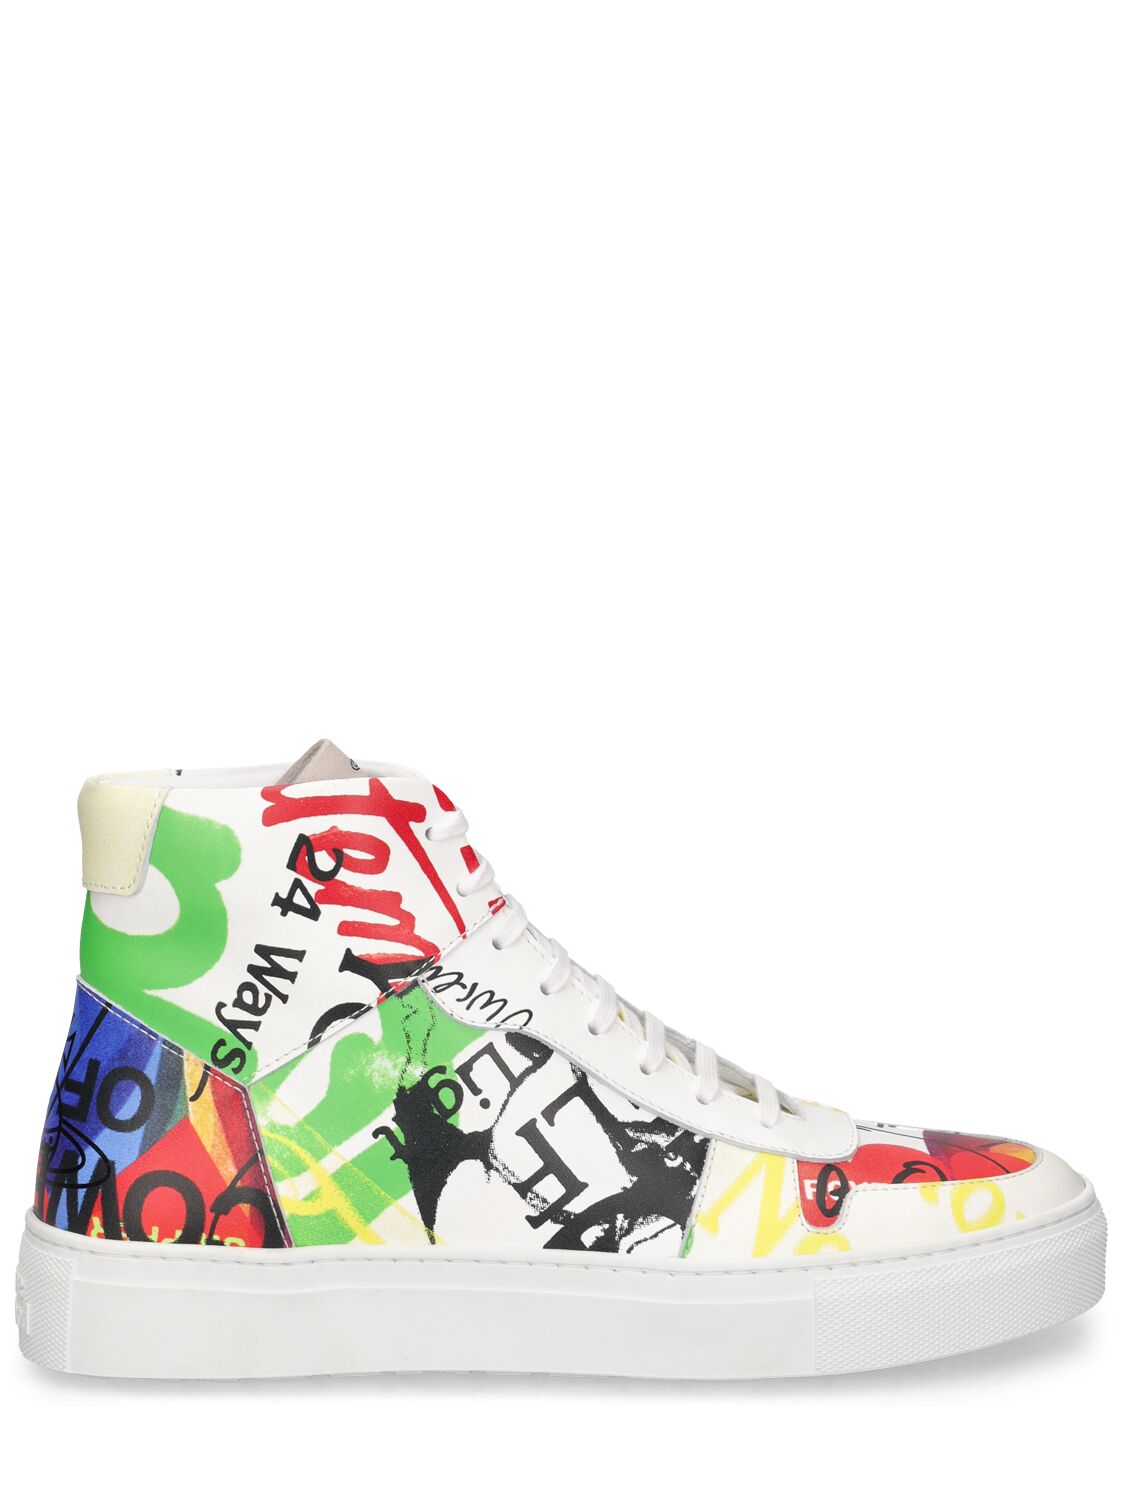 Vivienne Westwood 10mm Classic Leather High Top Trainers In Multicolor